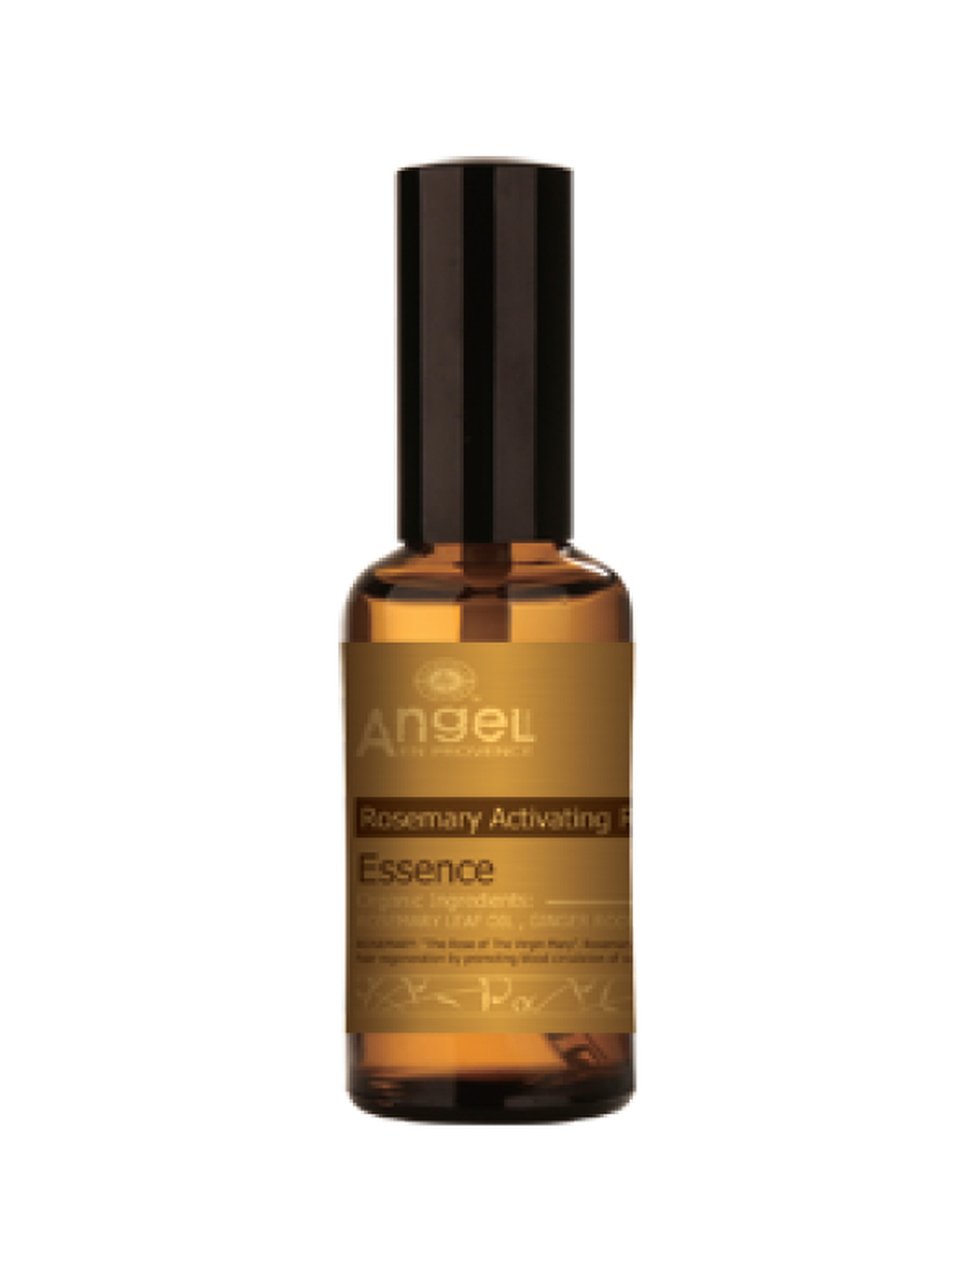 Angel En Provence Rosemary Activating Regrowth Essence 50ml